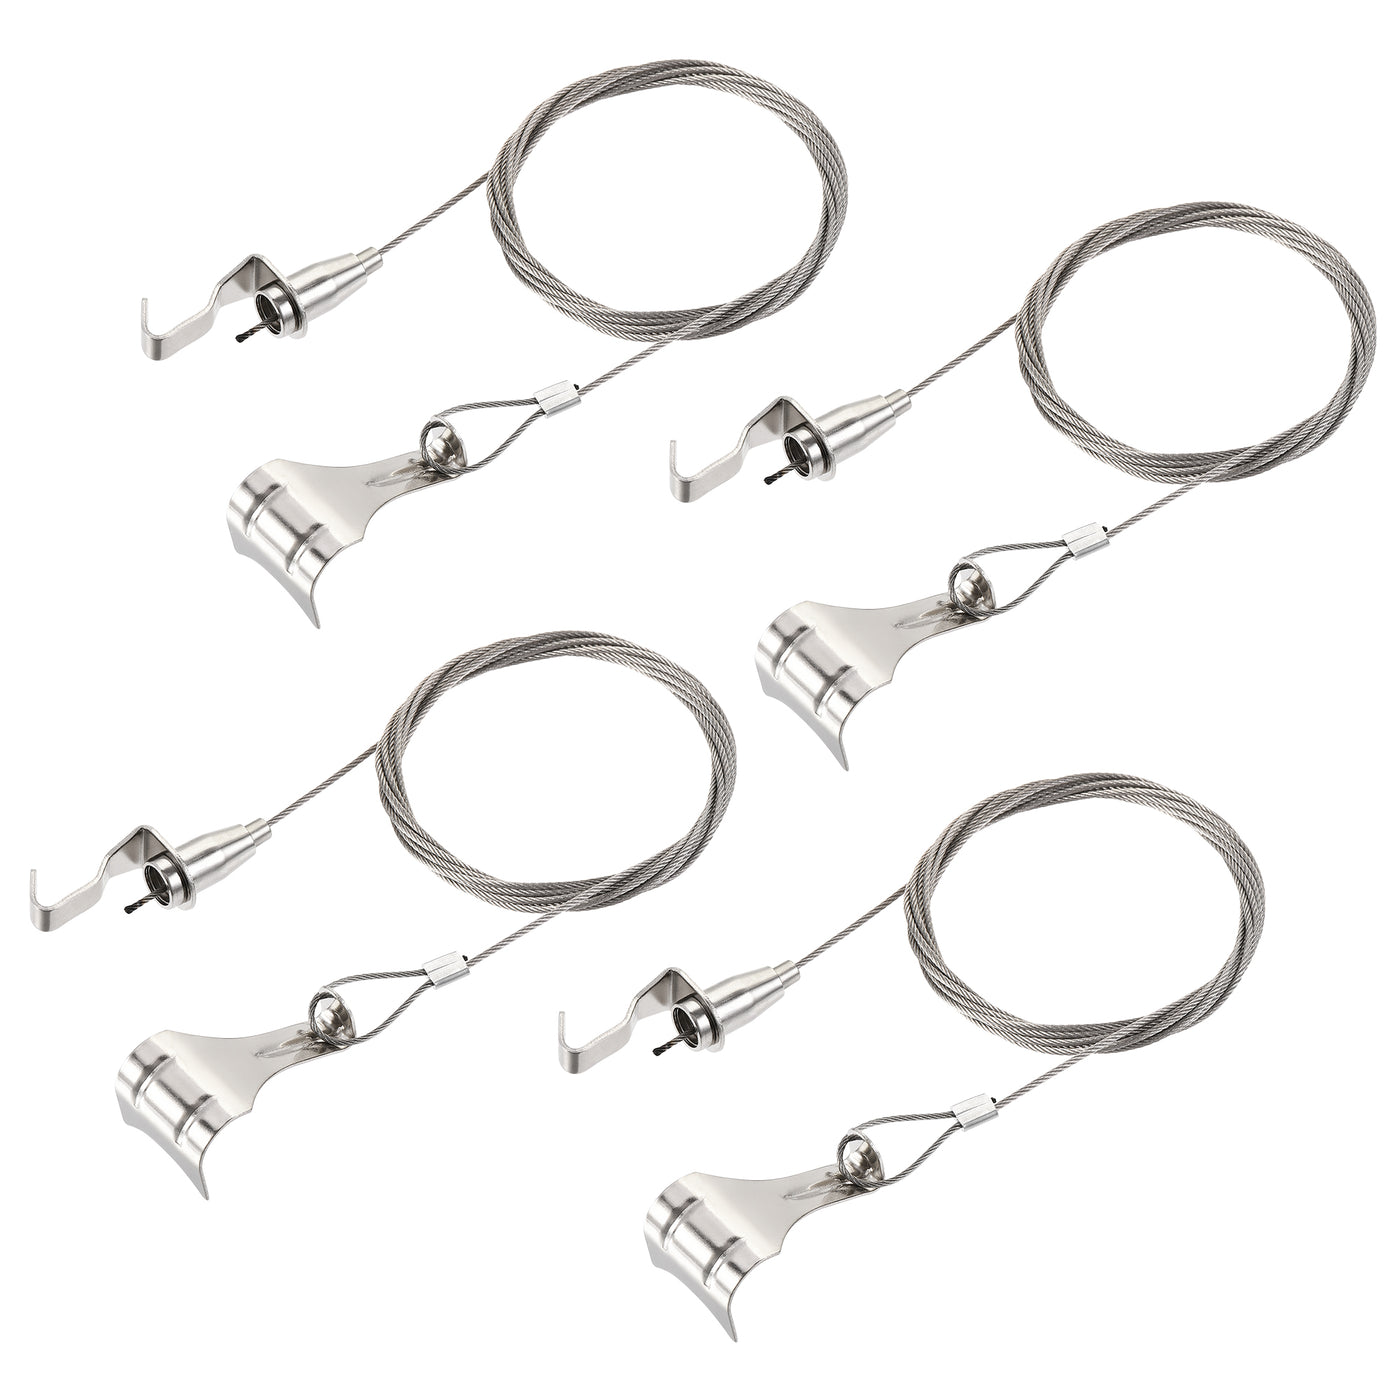 uxcell Uxcell Picture Hanging Wire Kit, 4Set 2.5M Hanging Wire with Large S-Hook for Home Picture Art Gallery Picture Display Kit, Load 66 lbs